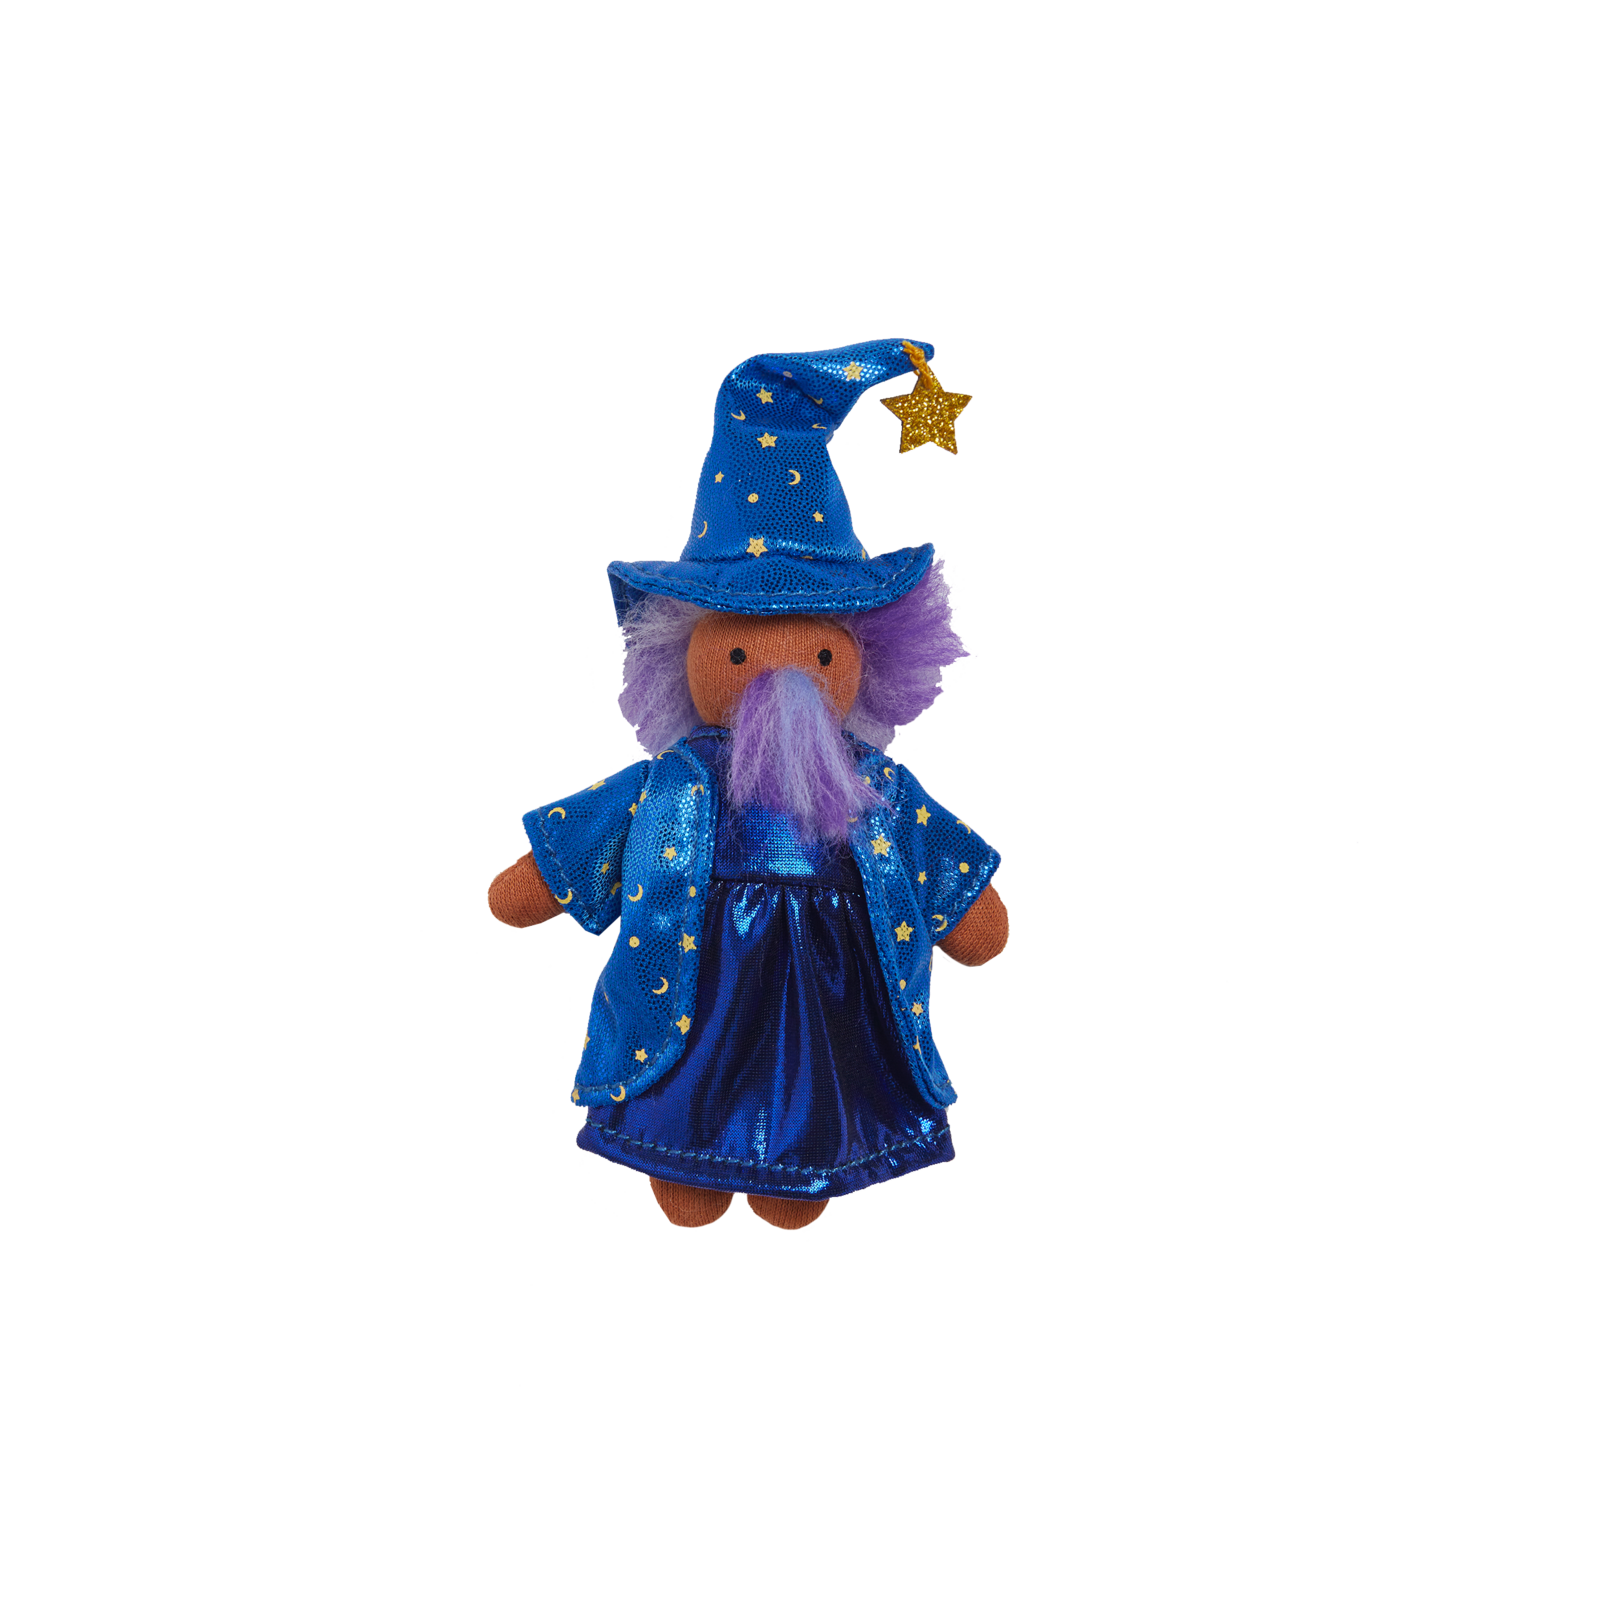 Made by hand, Wulfric The Wizard is the perfect size pal to pop in a pocket or the palm of a hand. Just add a sprinkle of Imagination to bring your Holdie™ friends to life!